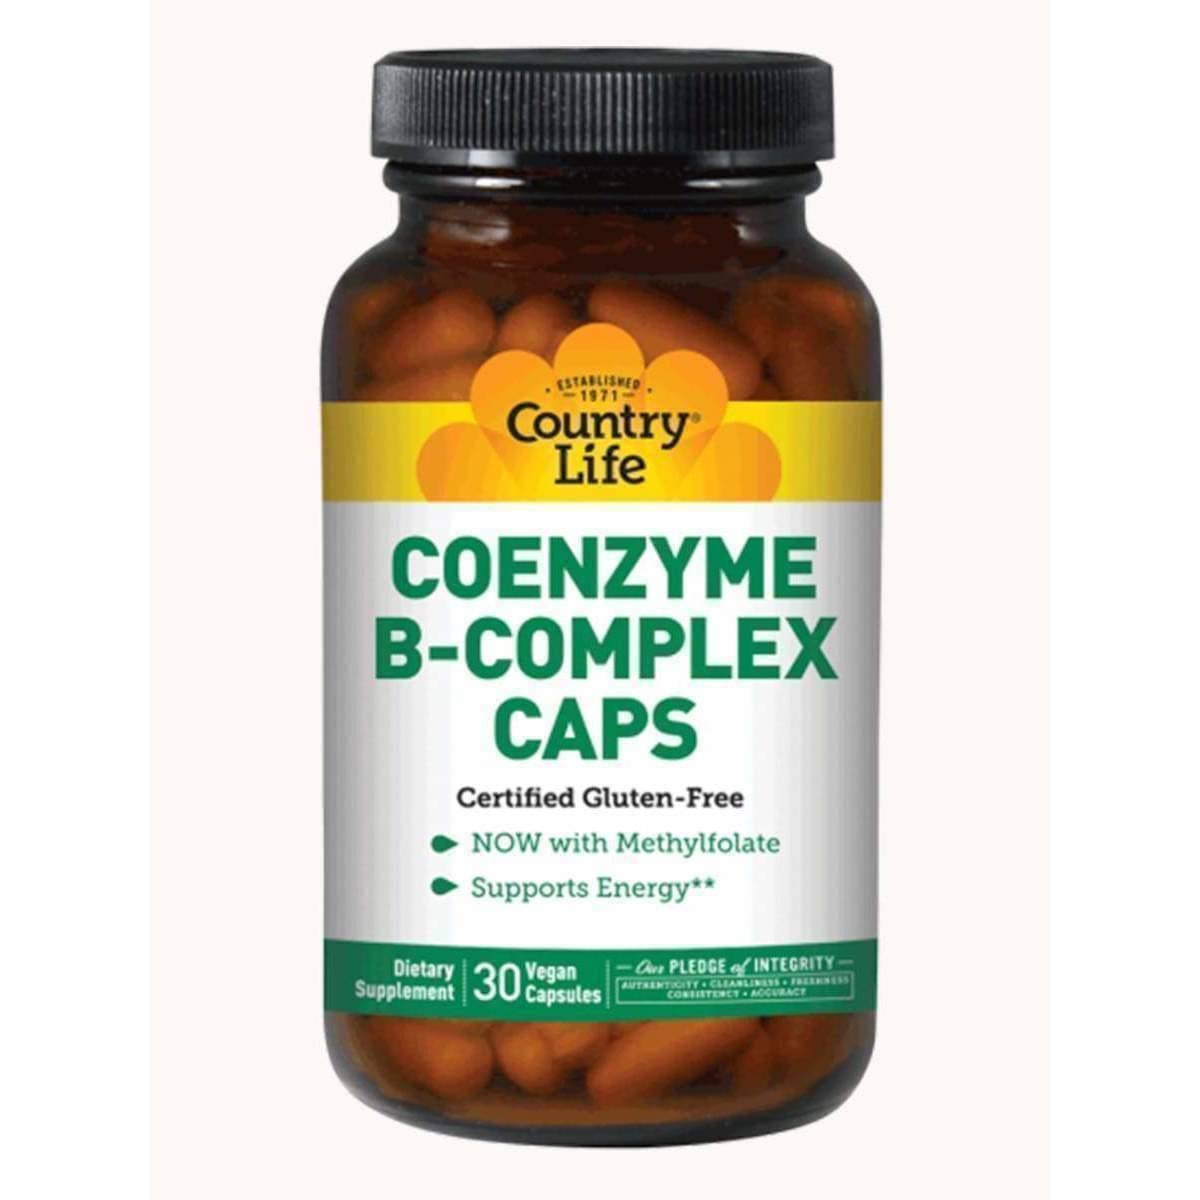 Country Life Coenzyme B-Complex Caps - 30 Vegetarian Capsules